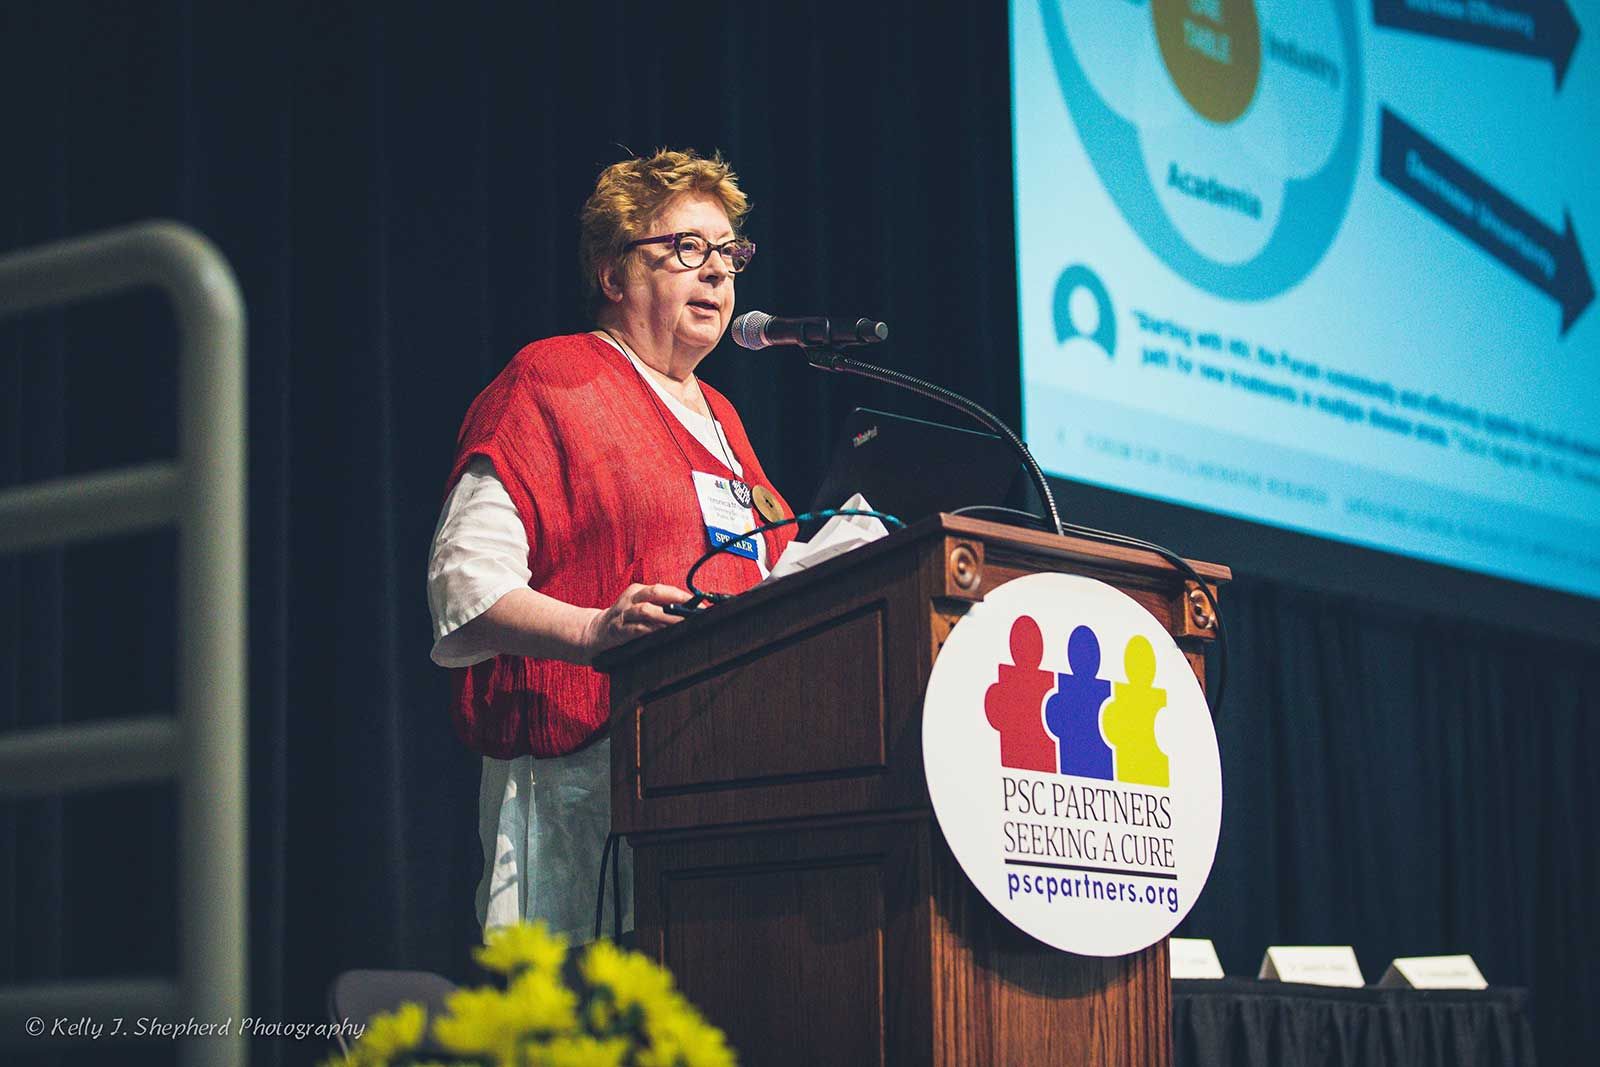 A PSC specialist, Dr. Veronica Miller, stand at a microphone. She is standing a podium with a PSC Partners logo on it. Behind her, you can see a screen showing a presentation.